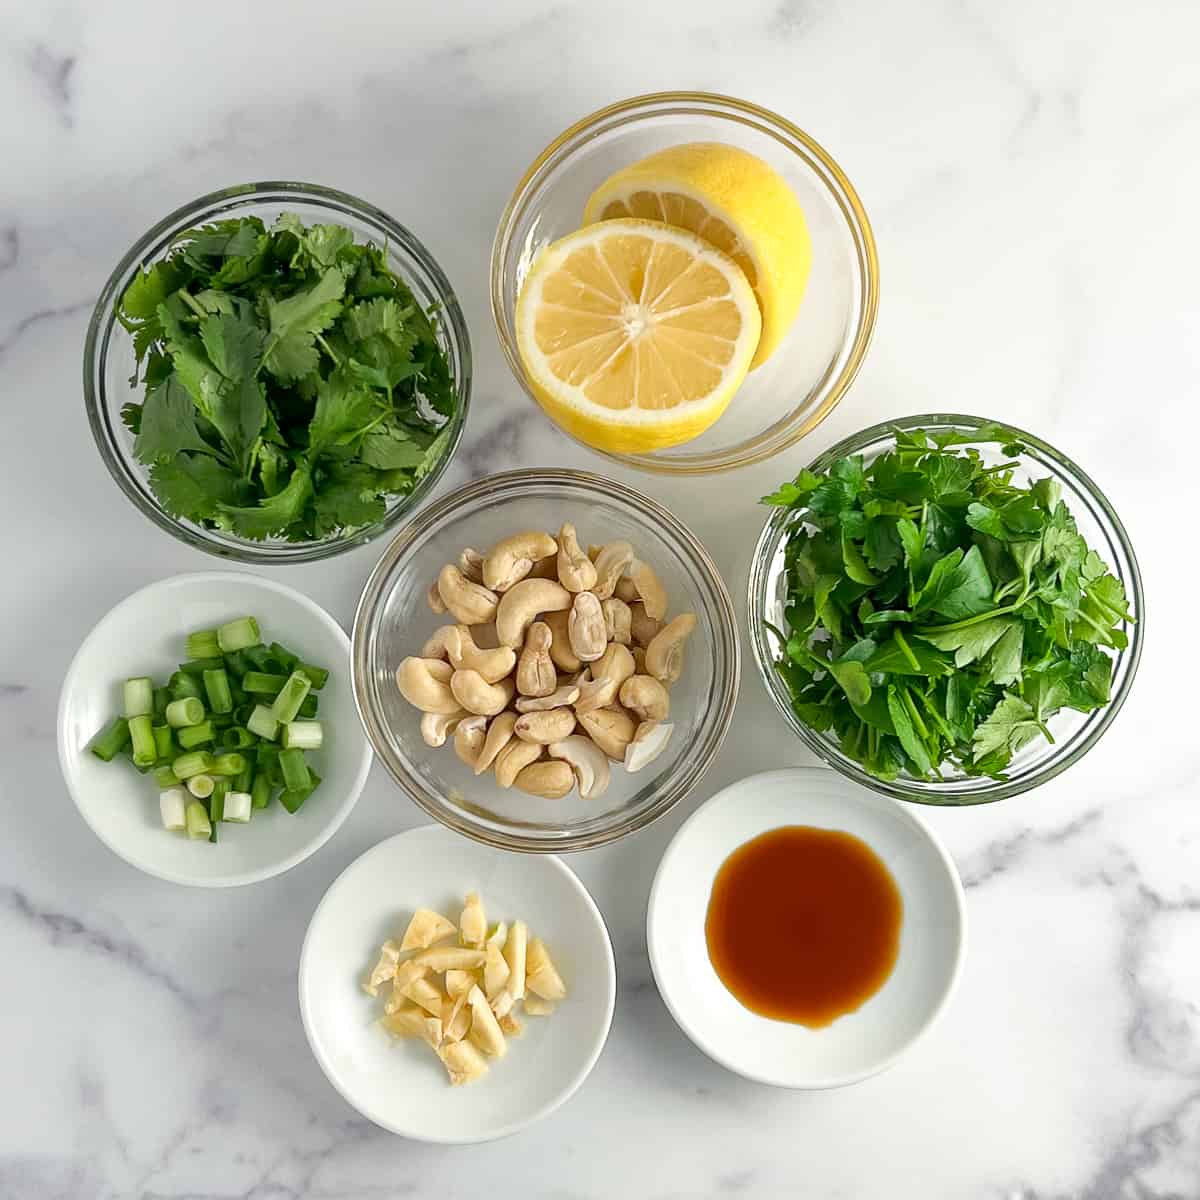 top view of key ingredients used in Easy Green Goddess Dressing on a marble surface. cilantro, parsley, lemon juice, cashews, green onion, garlic, coconut aminos.